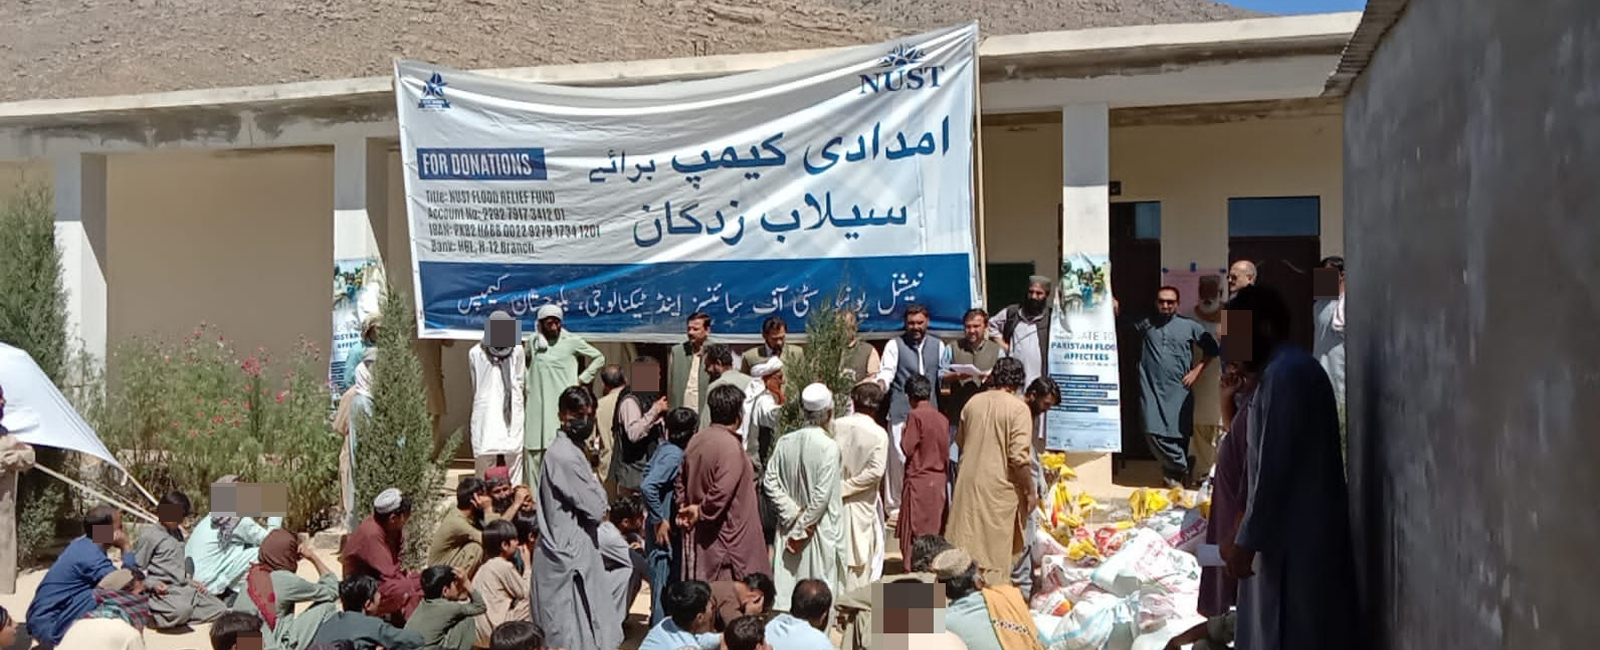 NUST Flood Relief Campaign in other areas of Balochistan